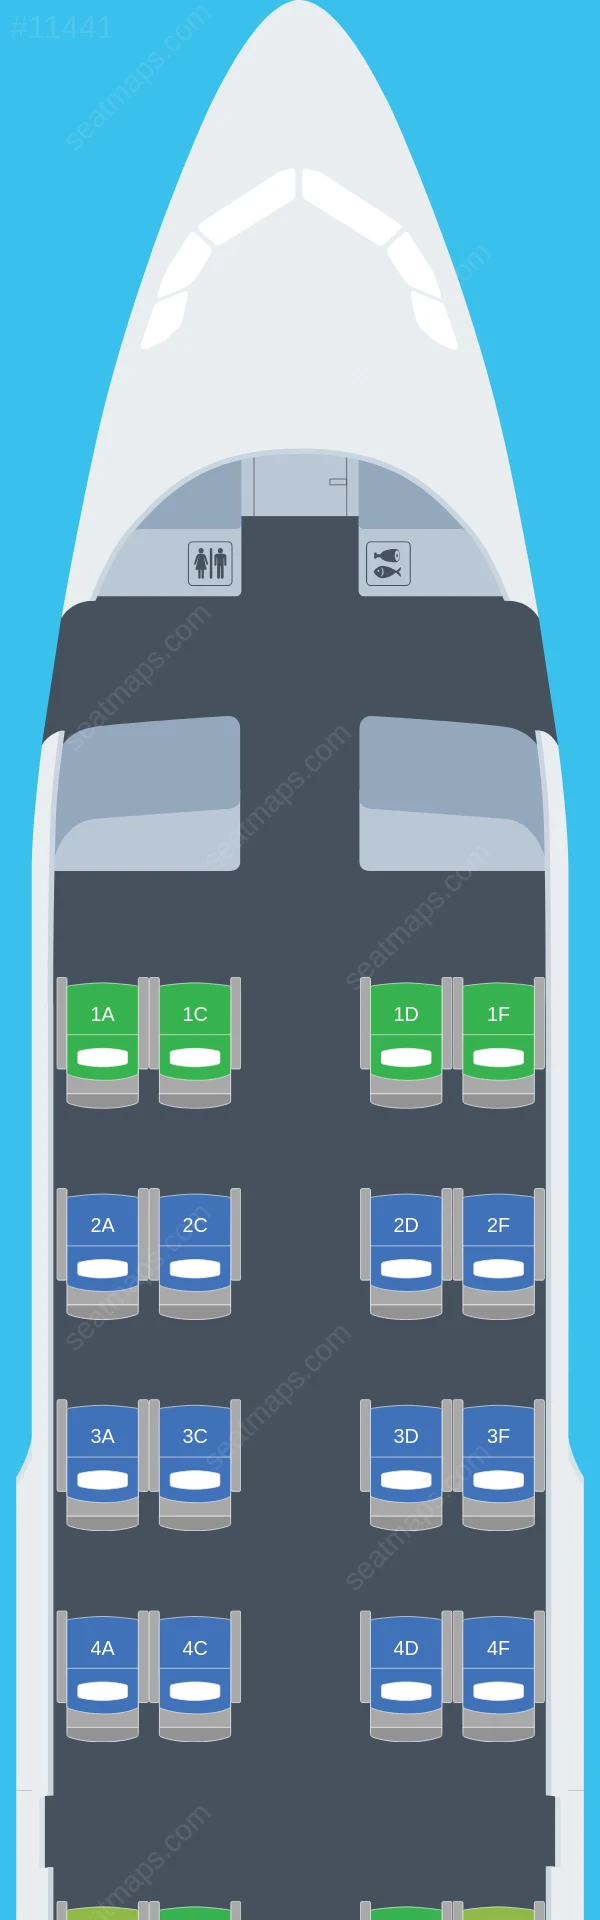 Beond Airbus A319-100 seatmap preview